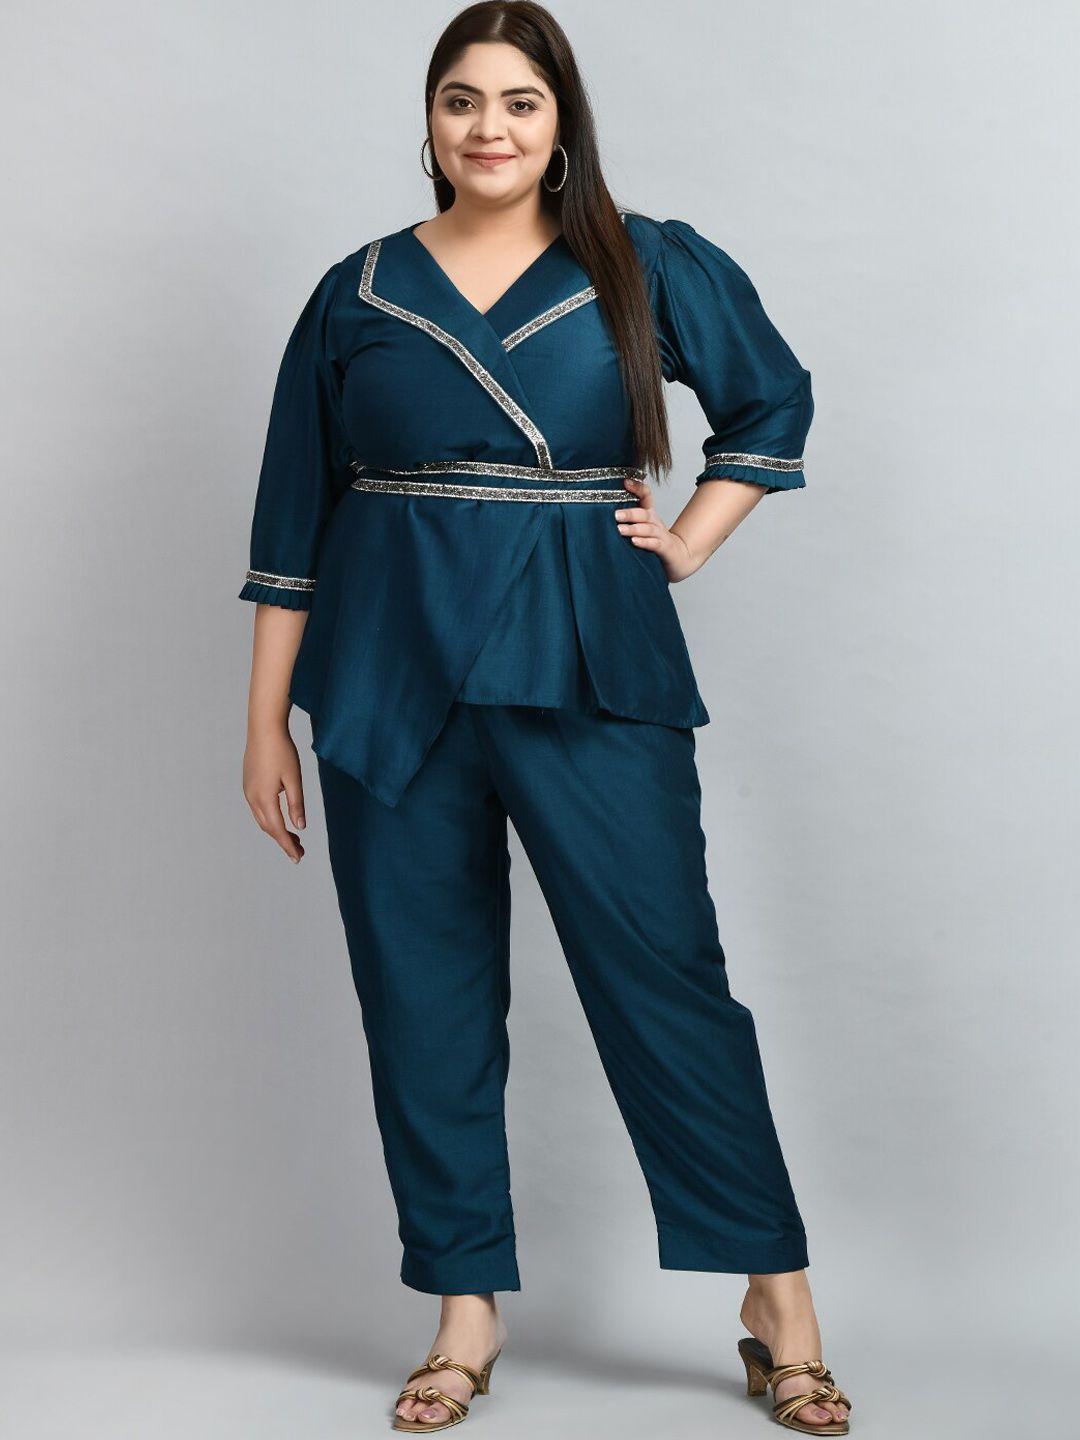 prettyplus by desinoor.com plus size embellished top & trouser co-ords